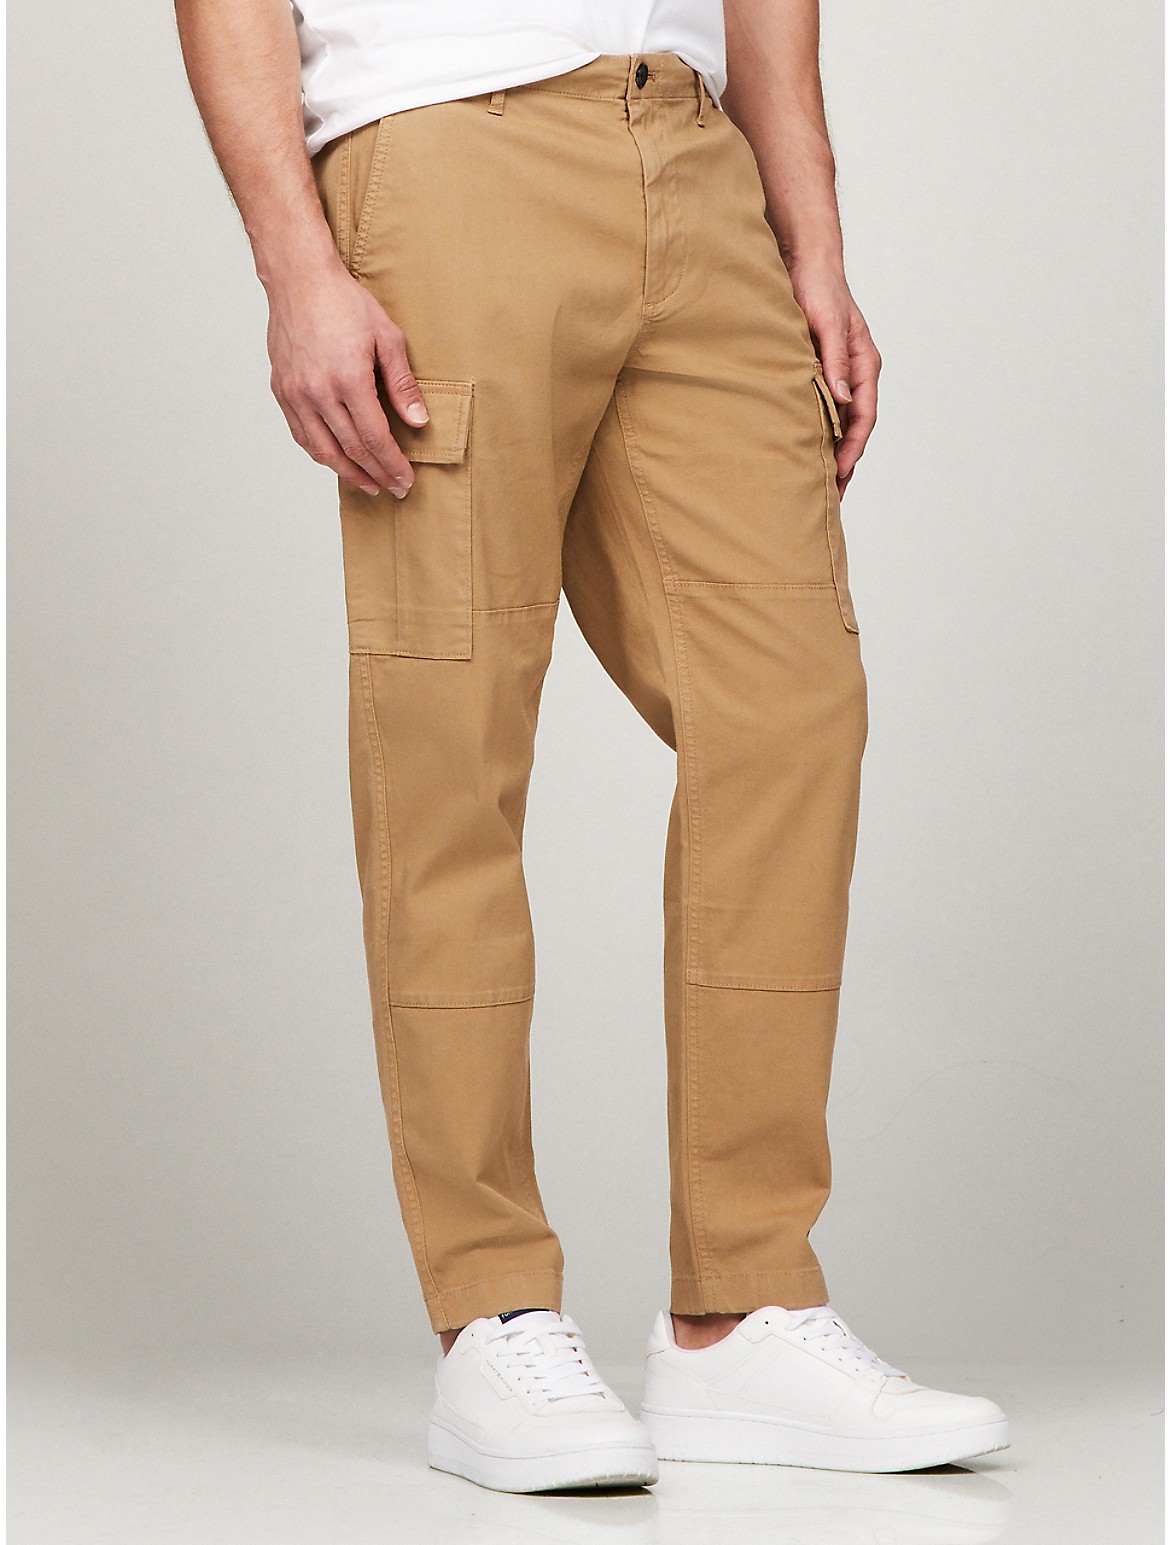 Tommy Hilfiger Gabardine Cargo Pant In Pinecone Tan